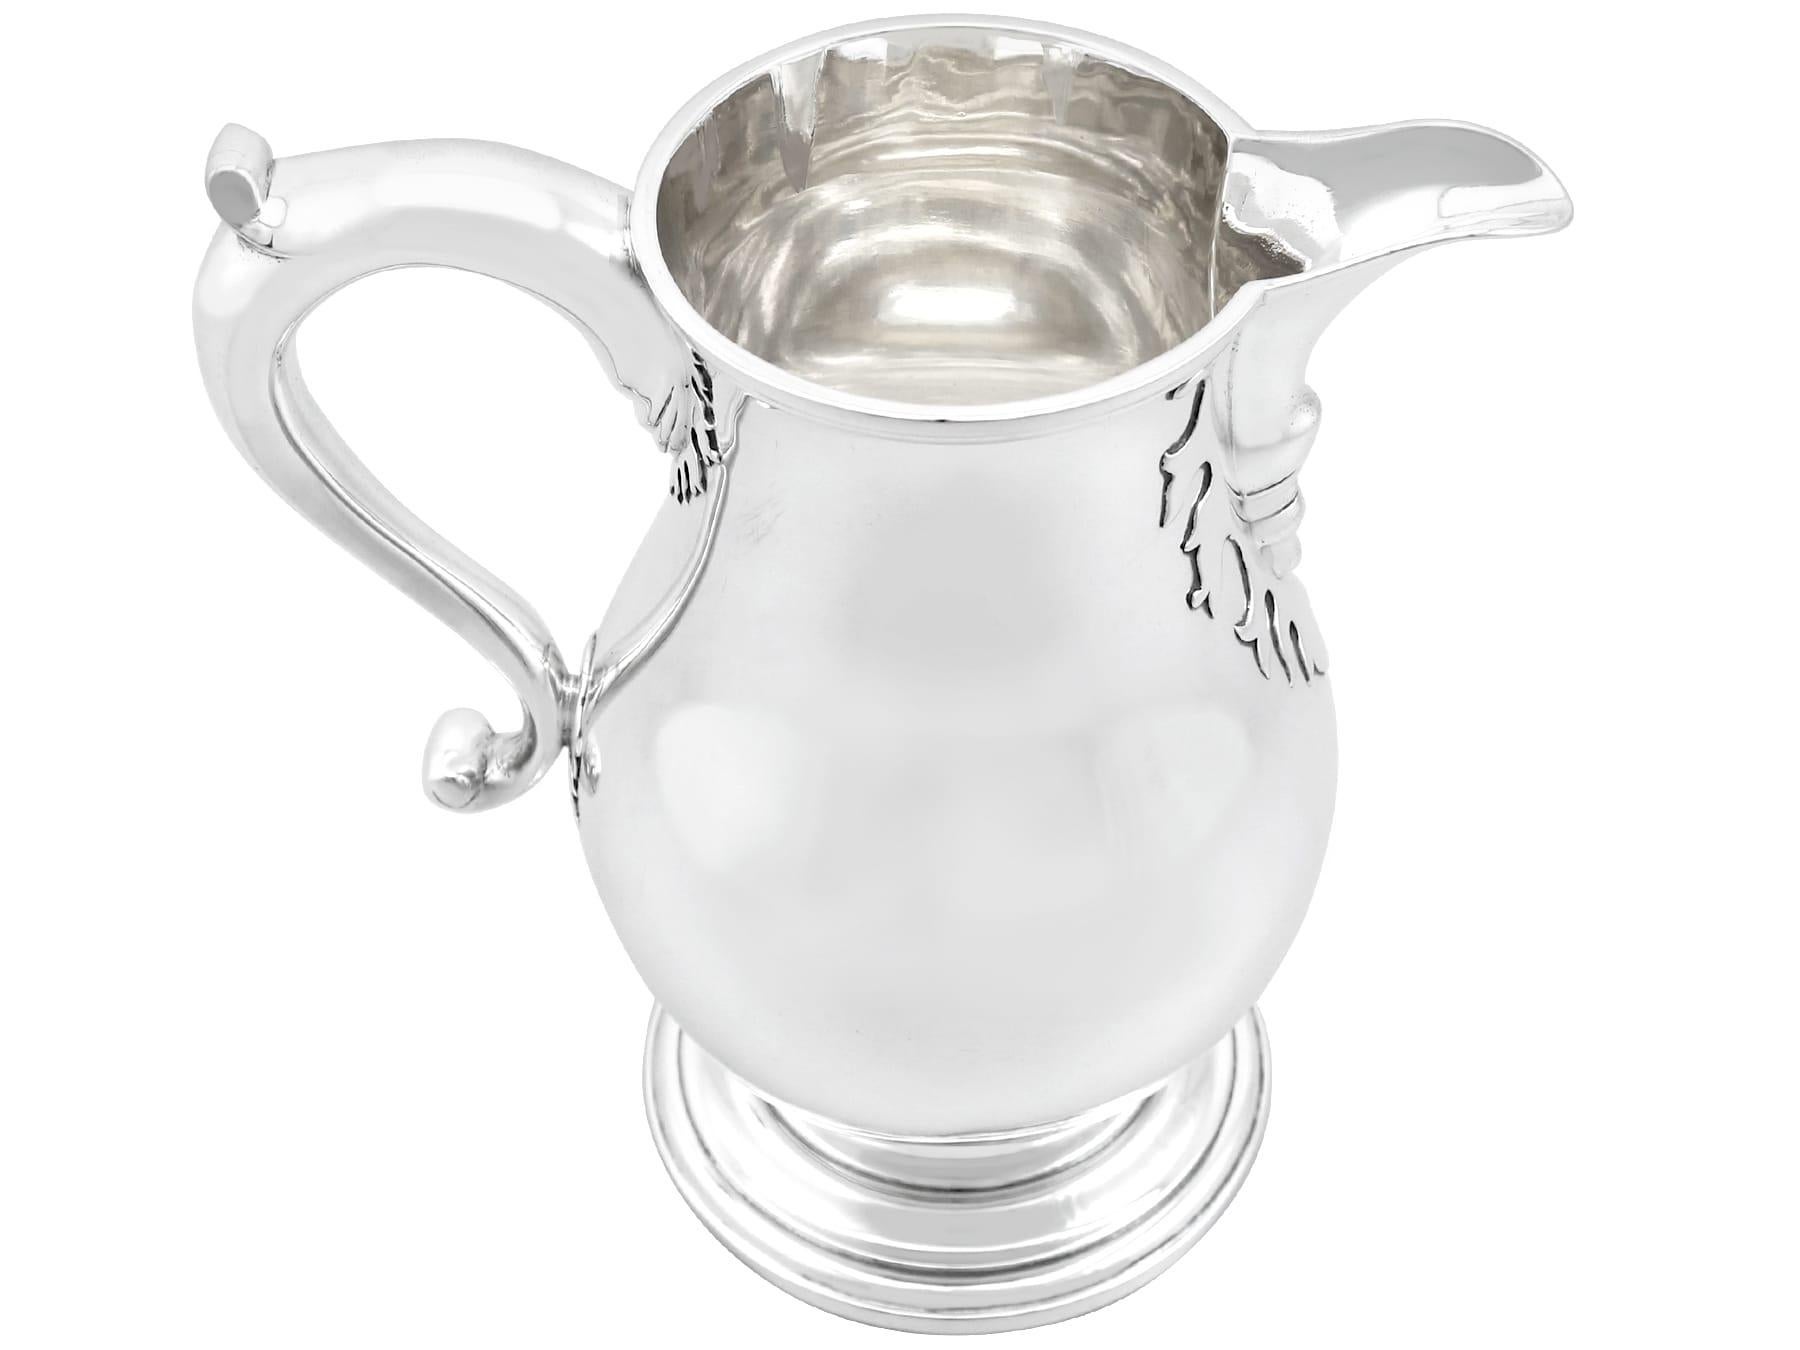 An exceptional, fine and impressive antique George V English sterling silver beer / water jug; part of our antique dining silverware collection

This exceptional antique 20th century sterling silver beer/water jug has a plain baluster form onto a